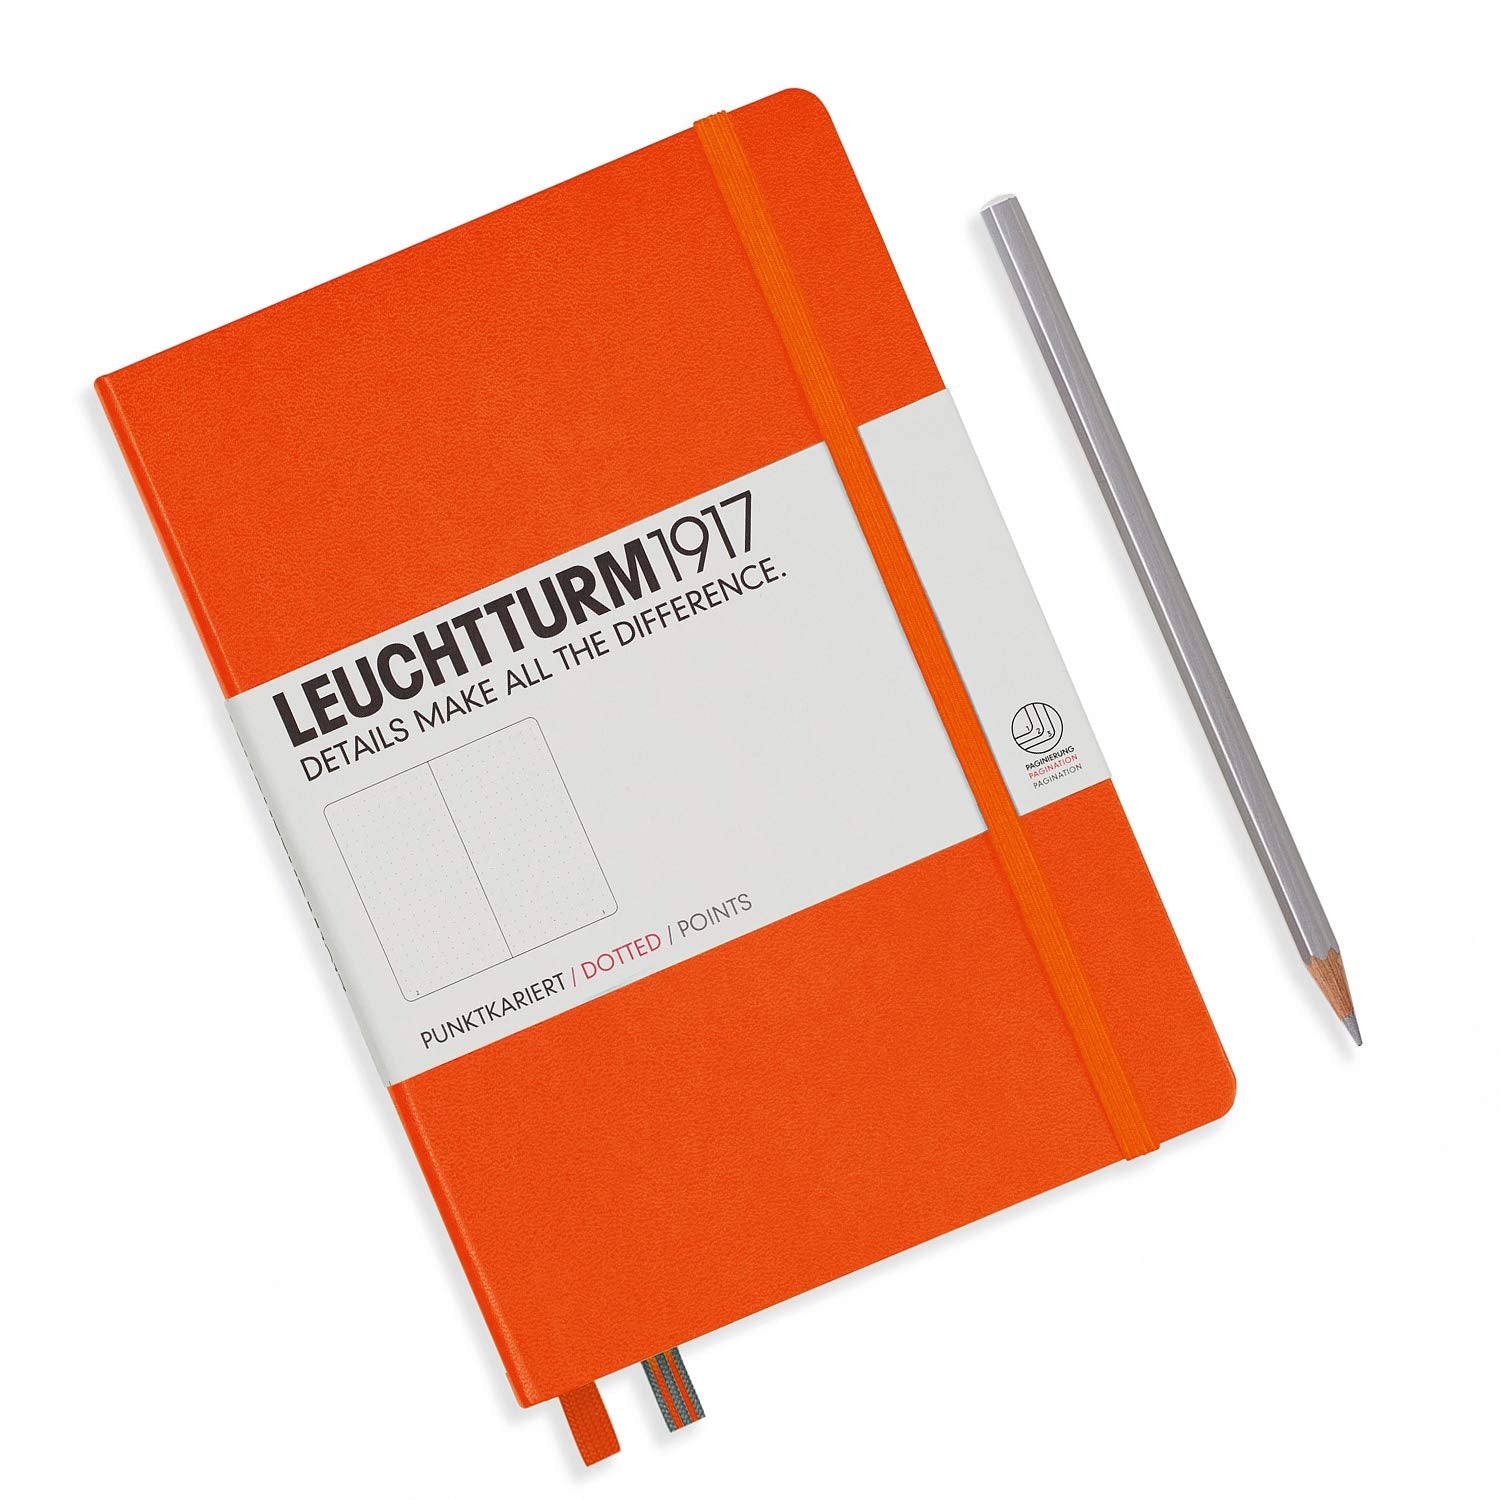 Leuchtturm1917 Medium A5 Dotted Hardcover Notebook (Orange) - 249 Numbered Pages